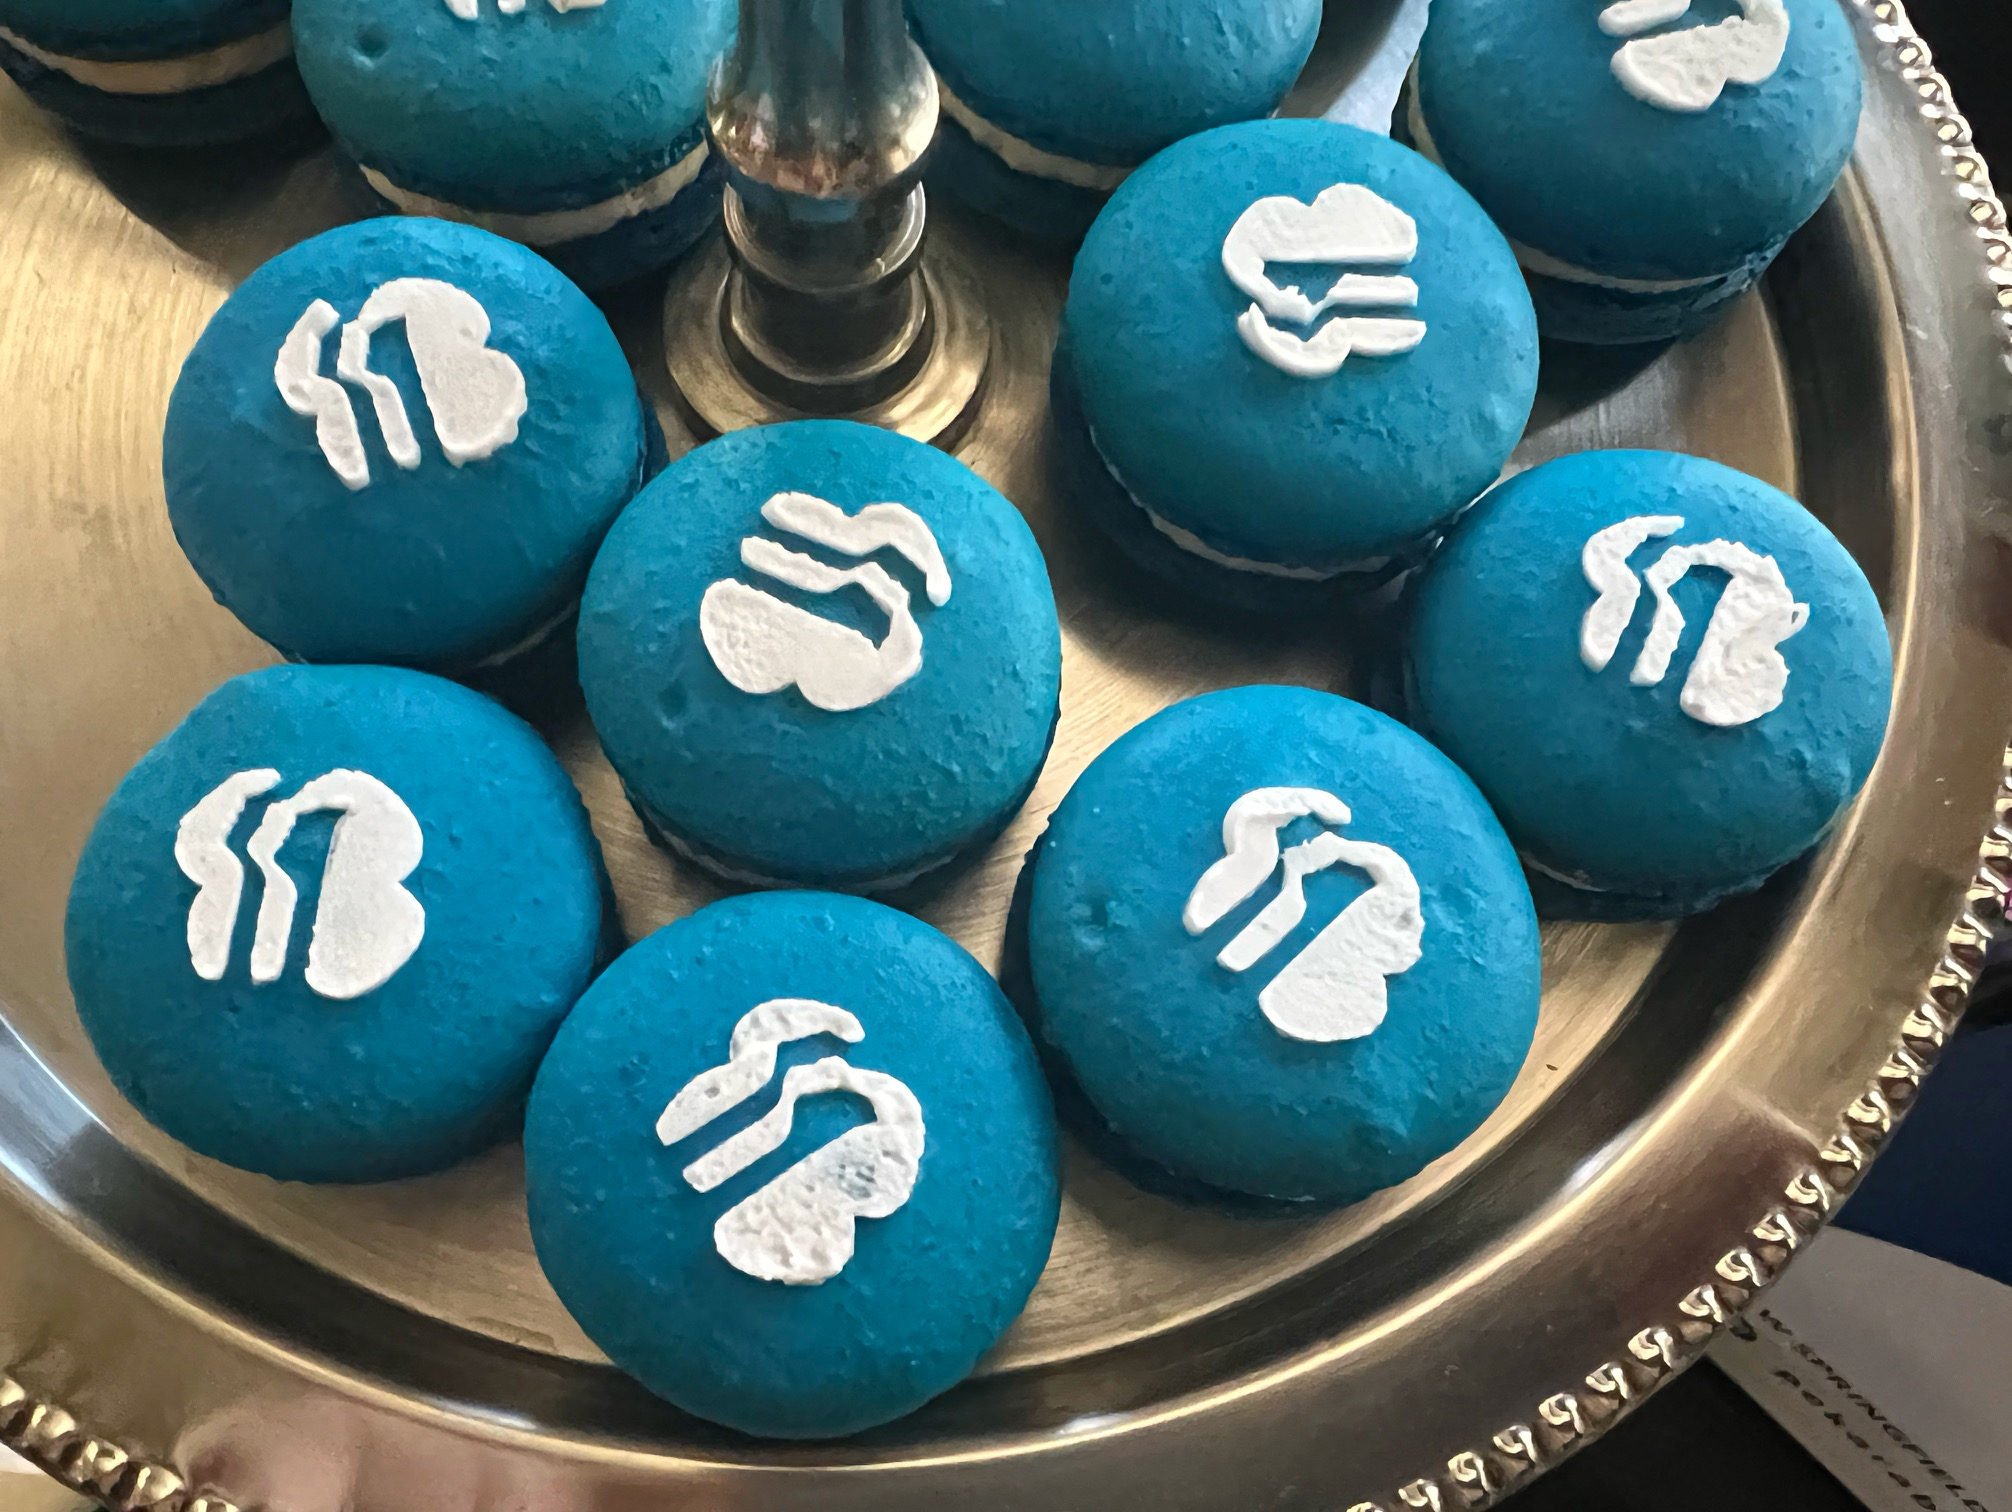 On a silver tiered holder, there are bright blue macarons with the Girl Scouts logo in white. Photo by Alyssa Buckley.